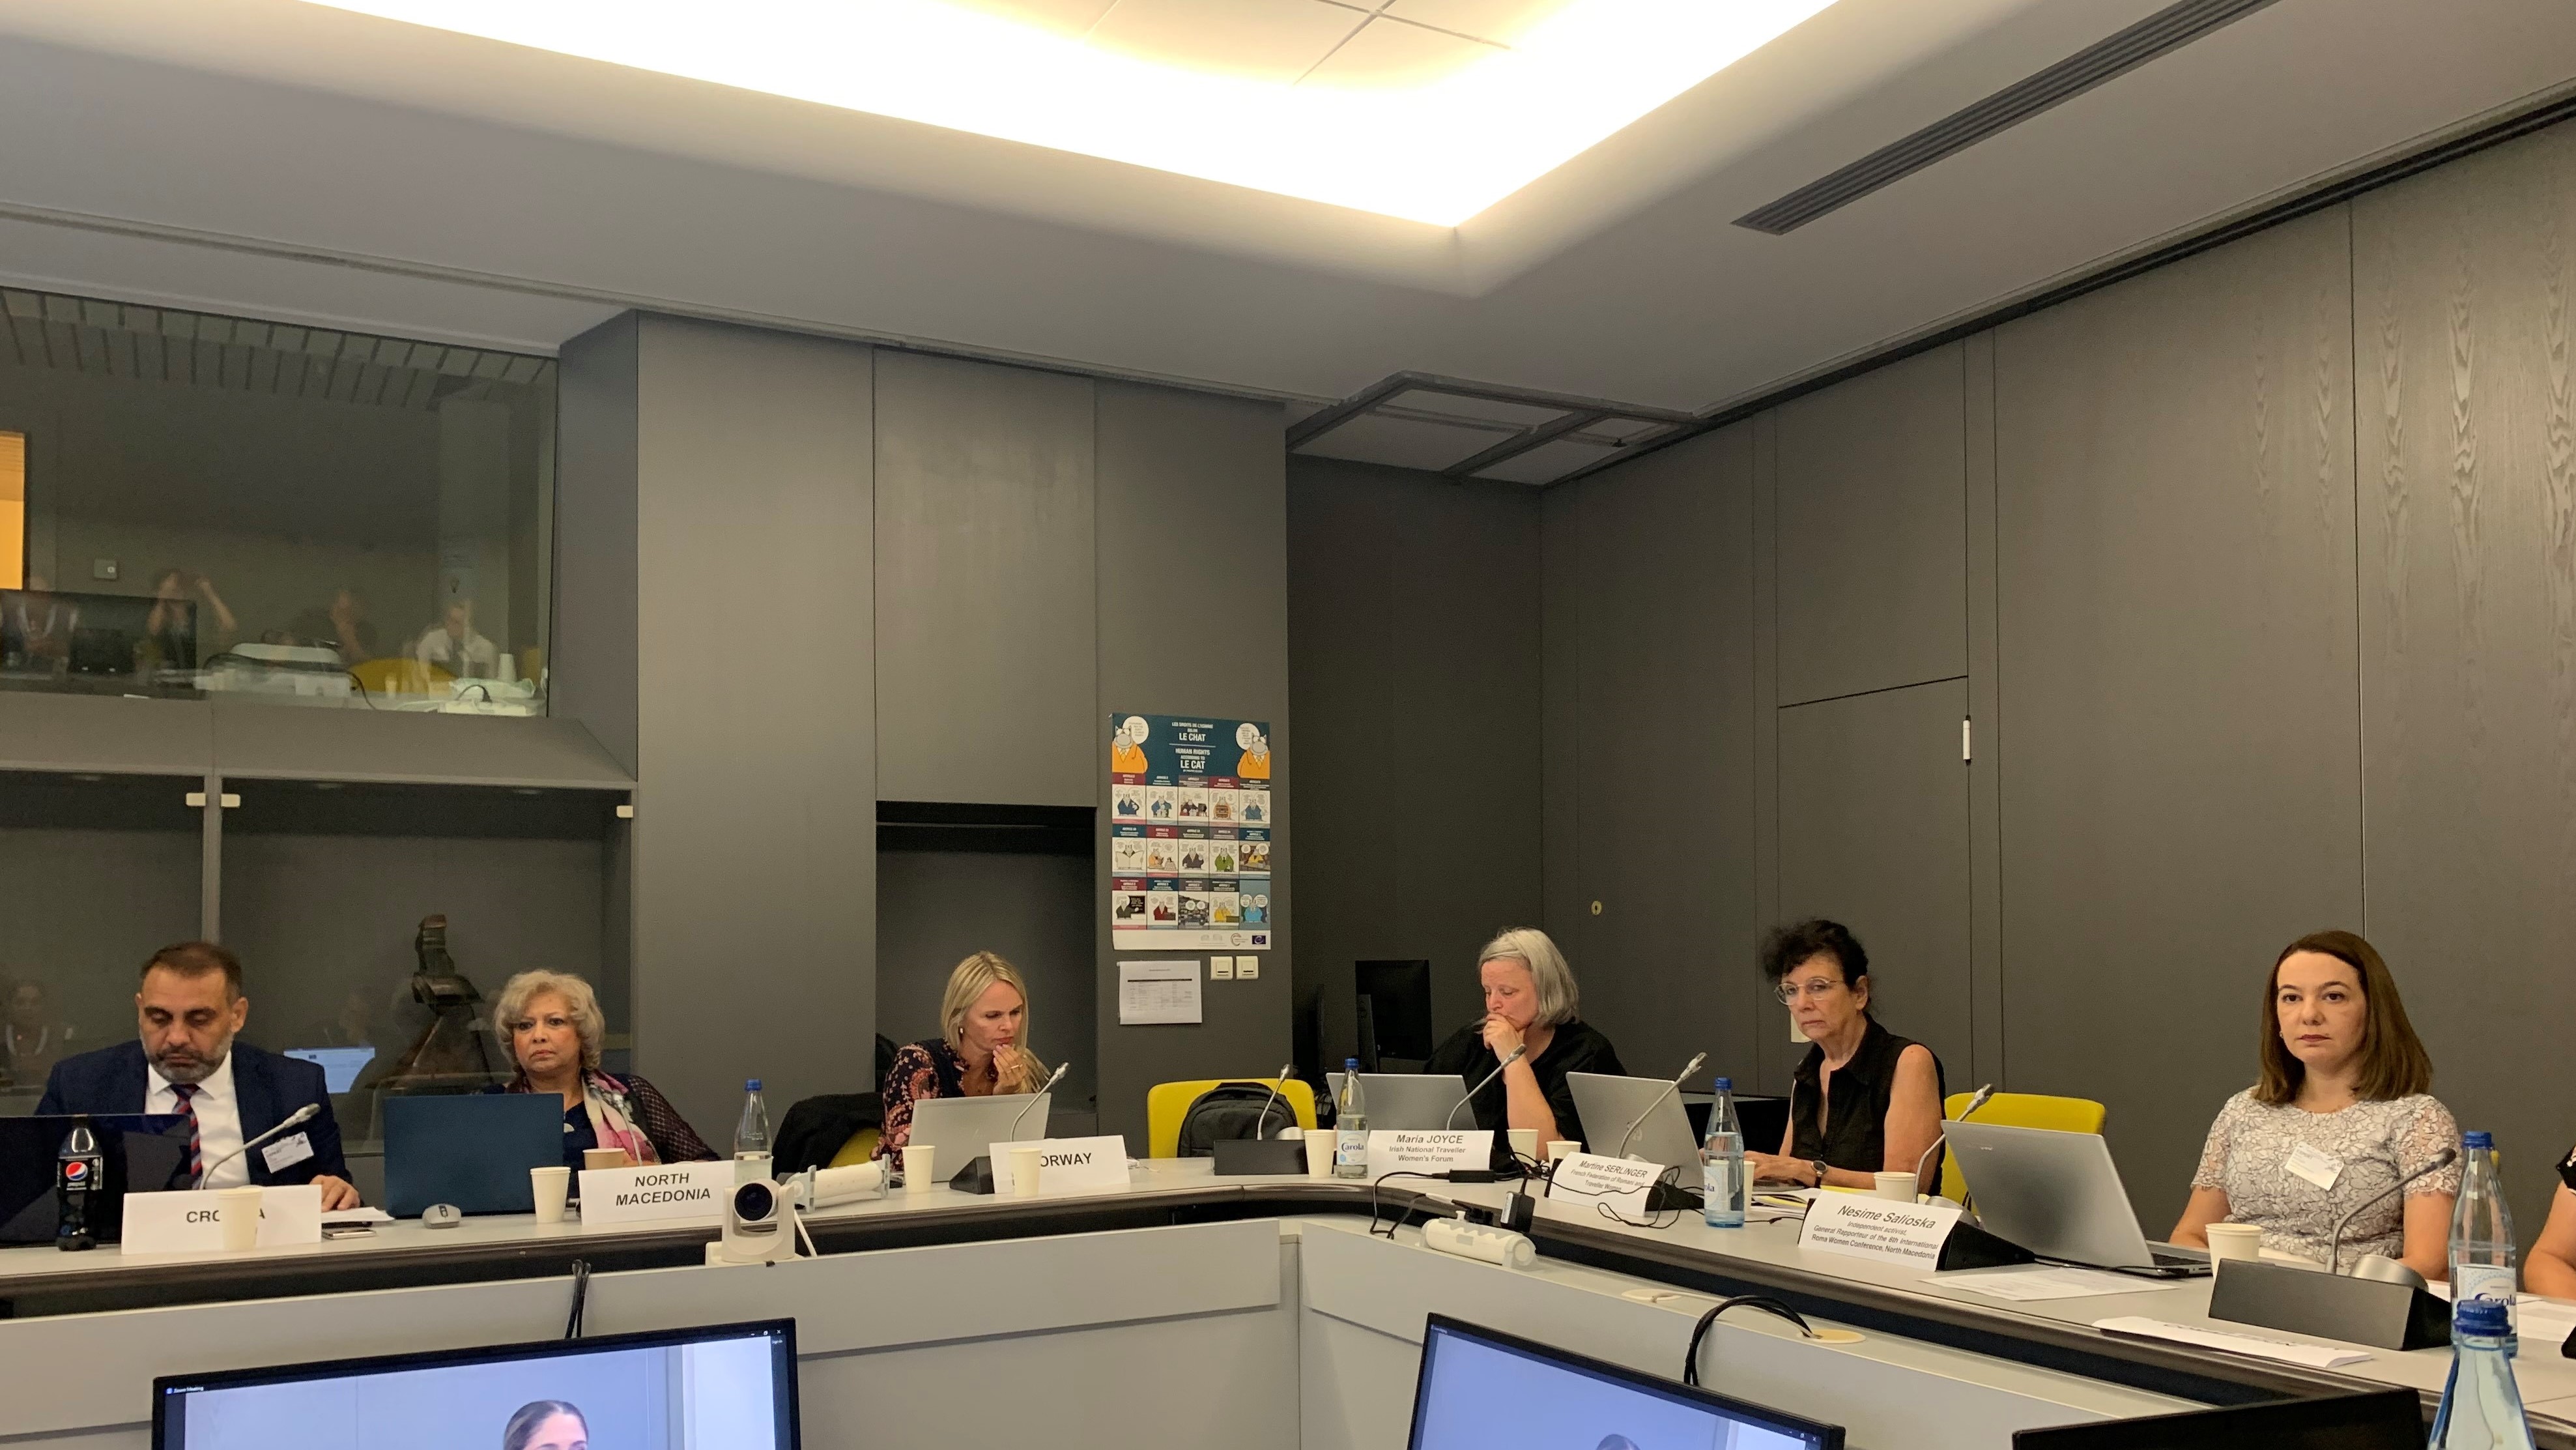 ADI-ROM working group to finalise its work on the draft CM Recommendation on equality for Roma and Traveller women and girls during its 6th meeting in Strasbourg